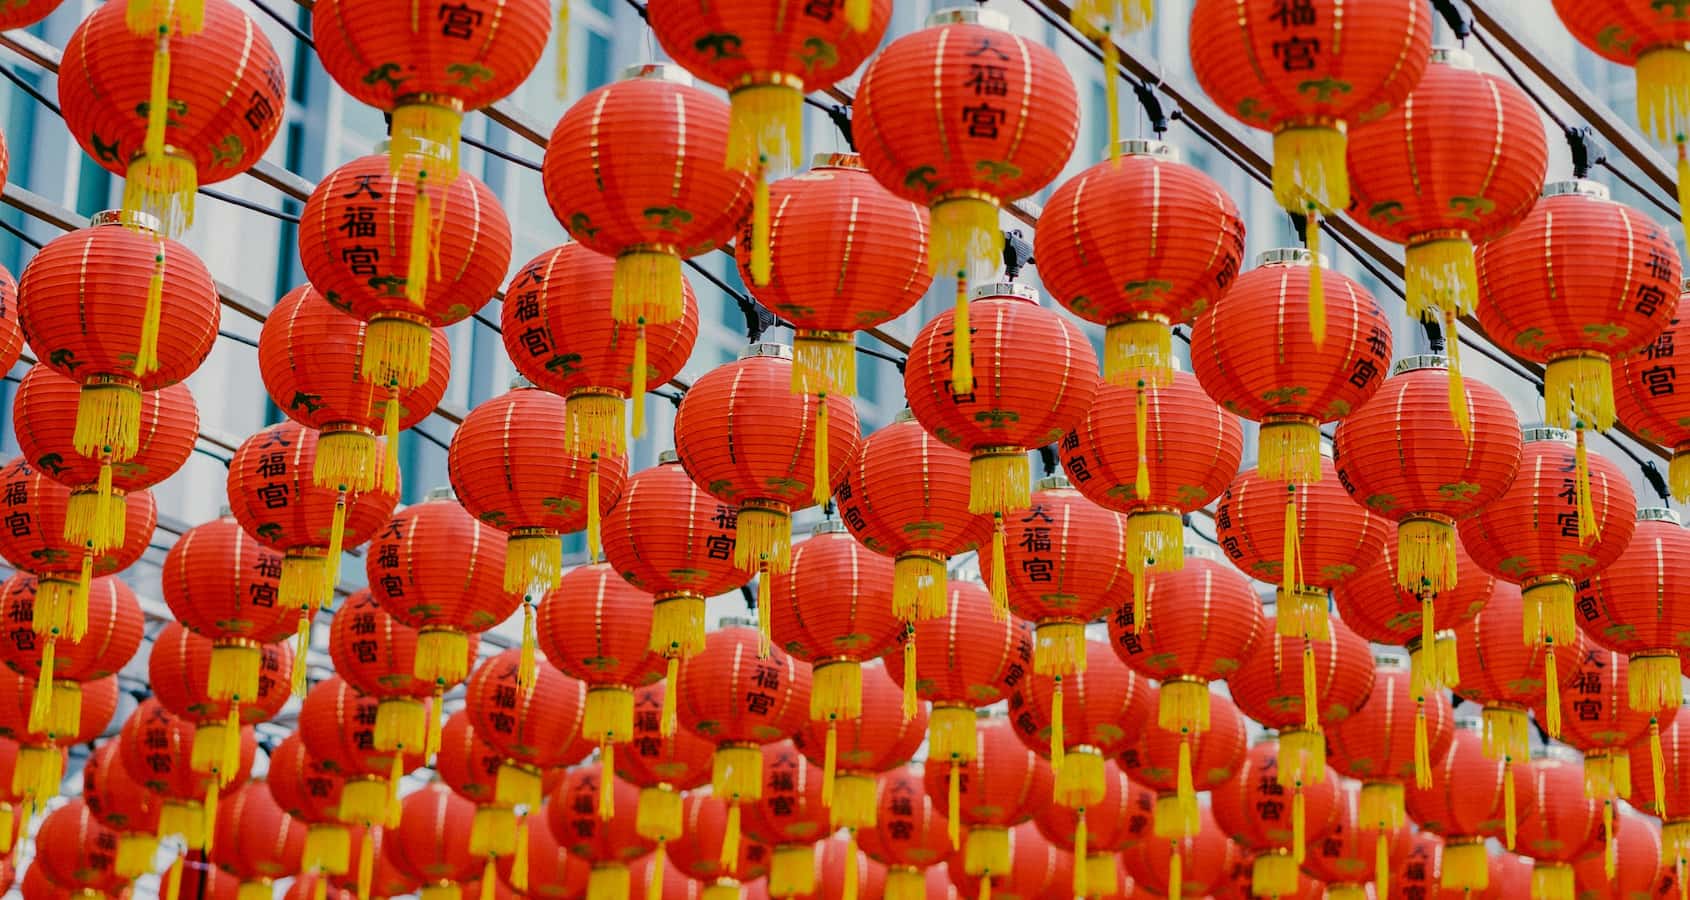 Red chinese laterns being hung up for CNY decorations.